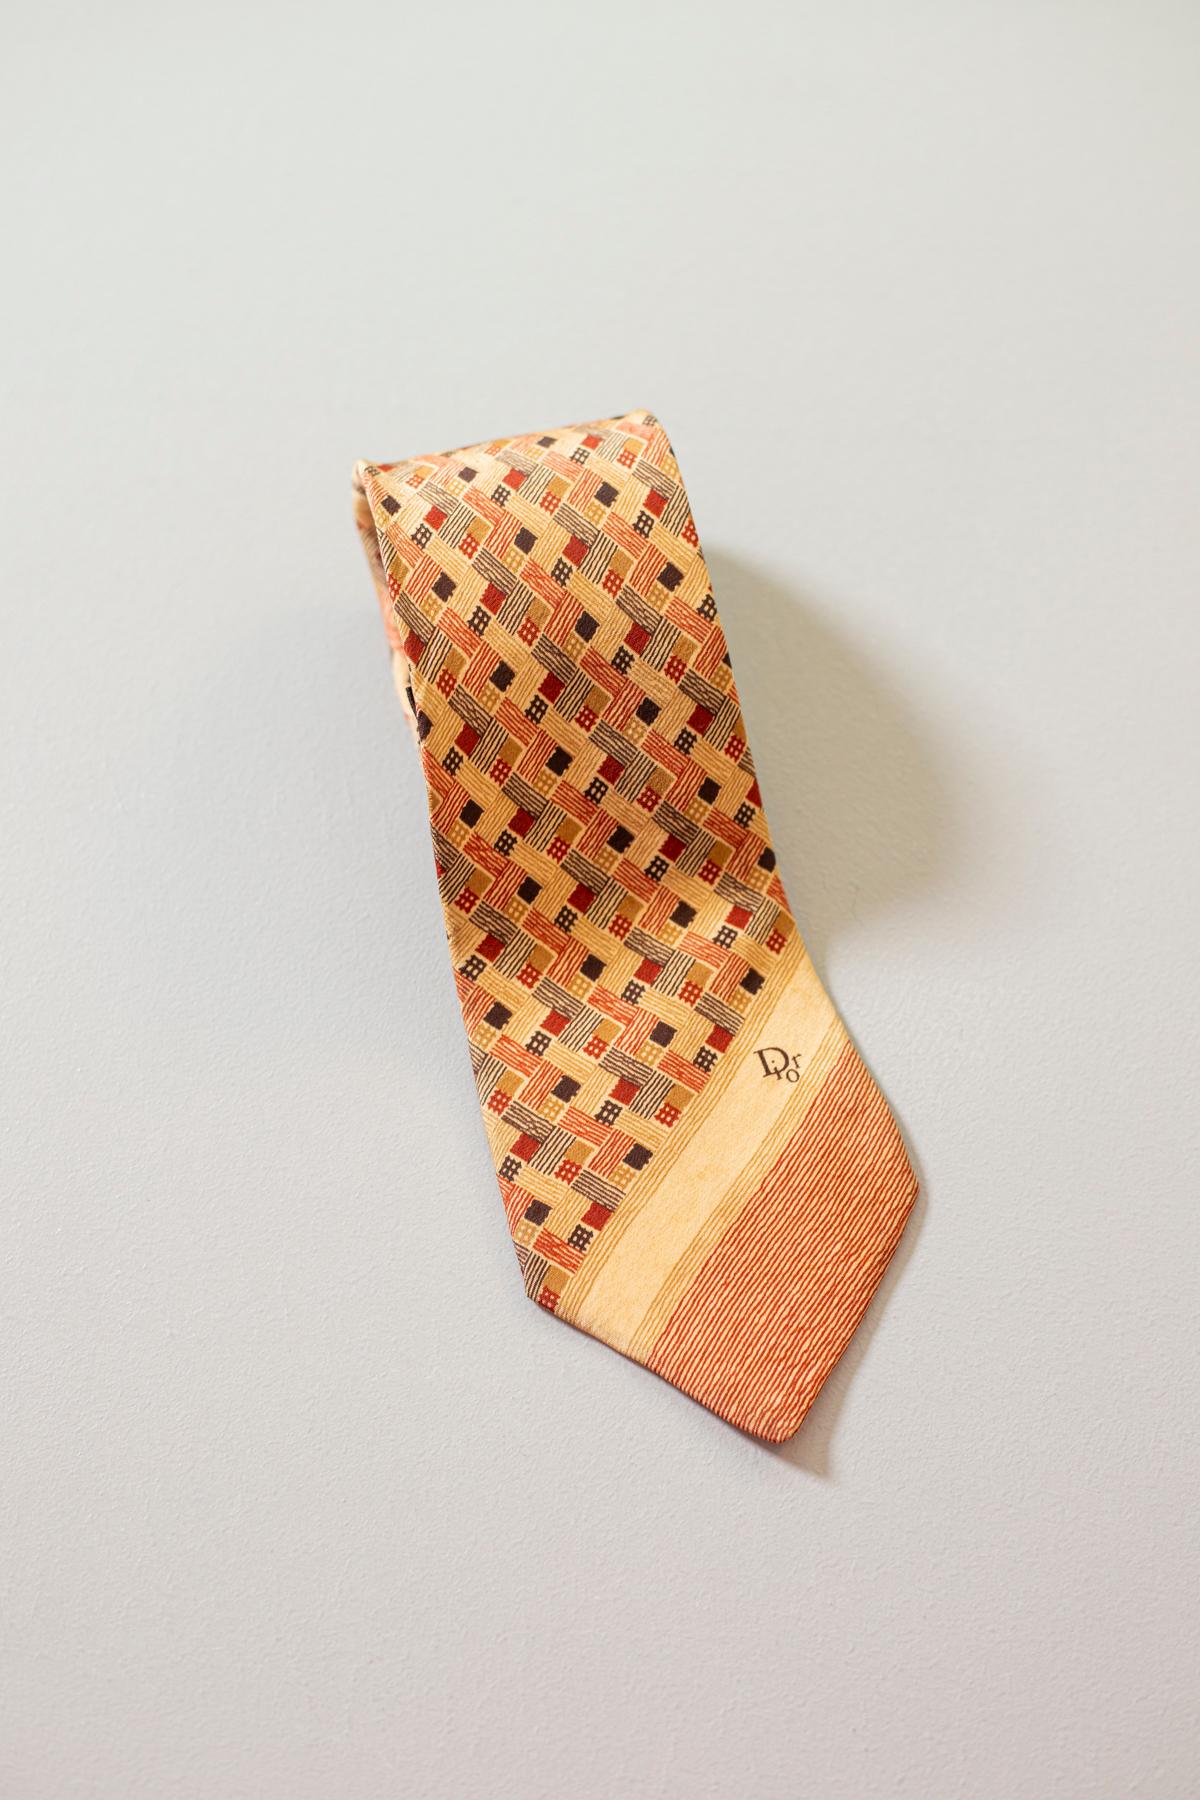 A timeless classic, this tie is designed by the famous designer Christian Dior, it is made of 100% silk. Decorated with geometric motifs in warm colors, in shades of beige. Thanks to its elegance, this accessory, if combined with a suit, can be